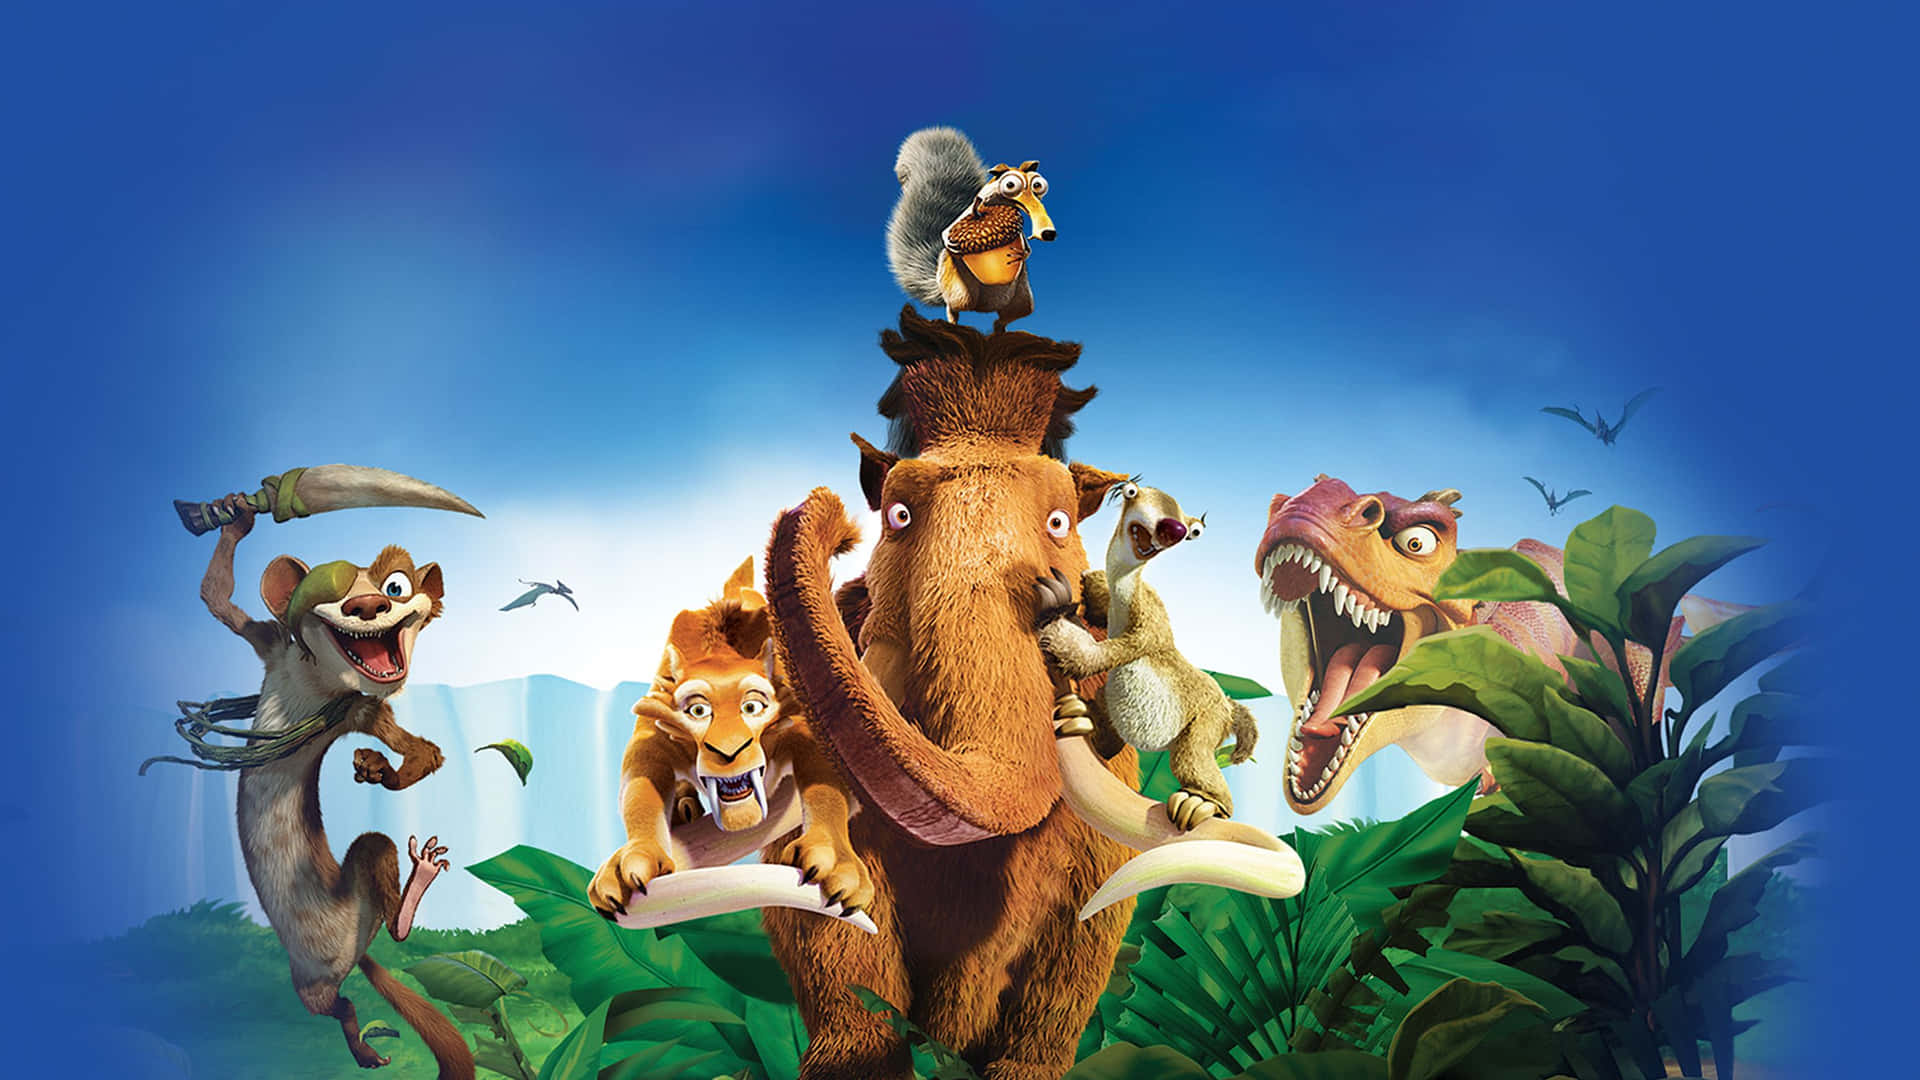 Poster Of Ice Age Dawn Of The Dinosaurs Wallpaper